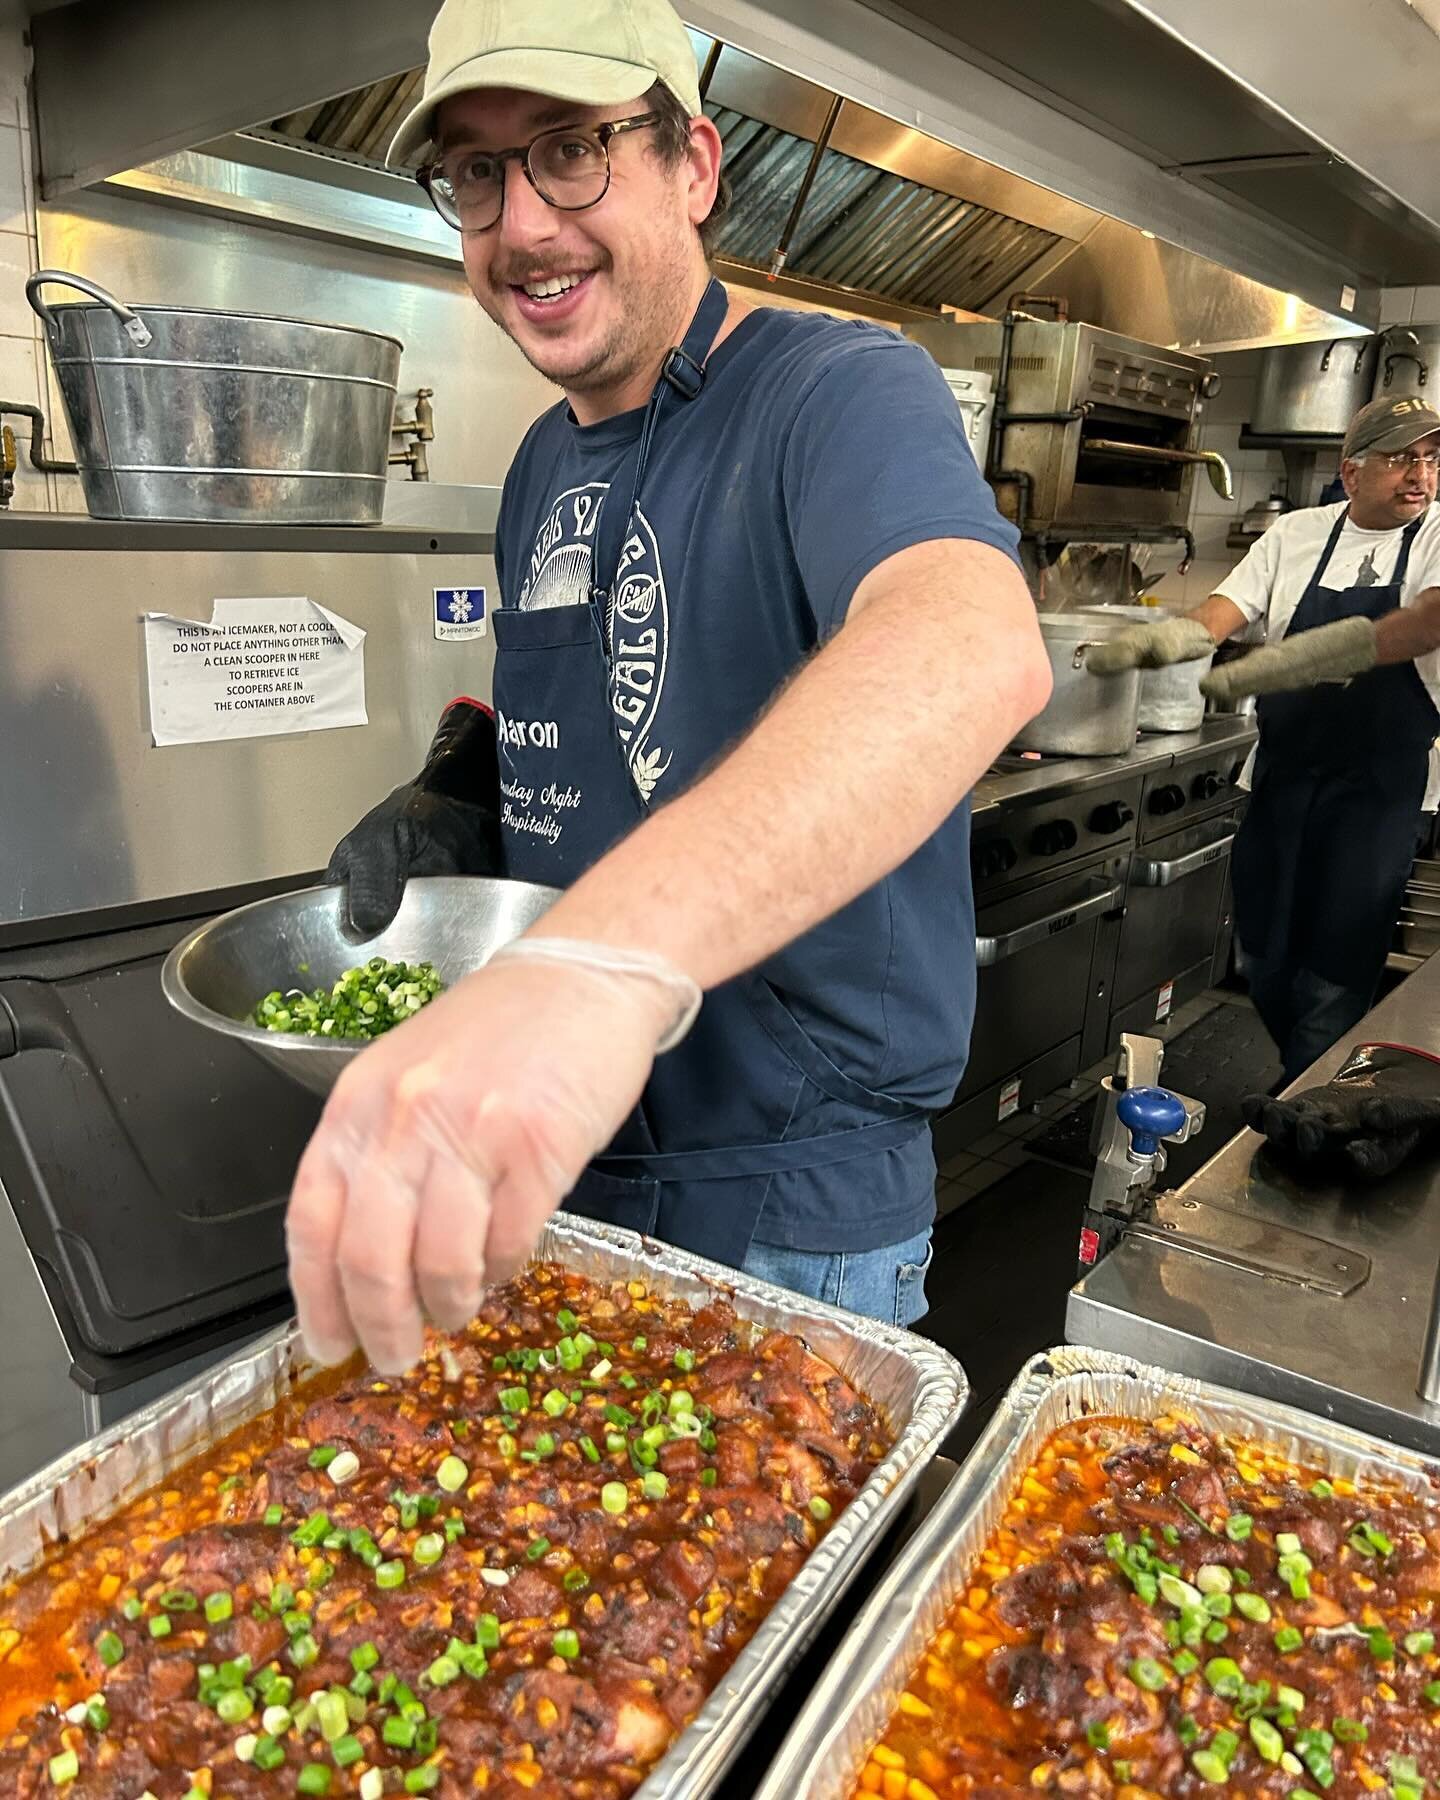 Chef Aaron is smiling because he&rsquo;s putting finishing touches on his delicious Hawaiian chicken. Chef Shelley&rsquo;s red bean, corn and tofu chili. Both dishes got rave reviews from our guests.